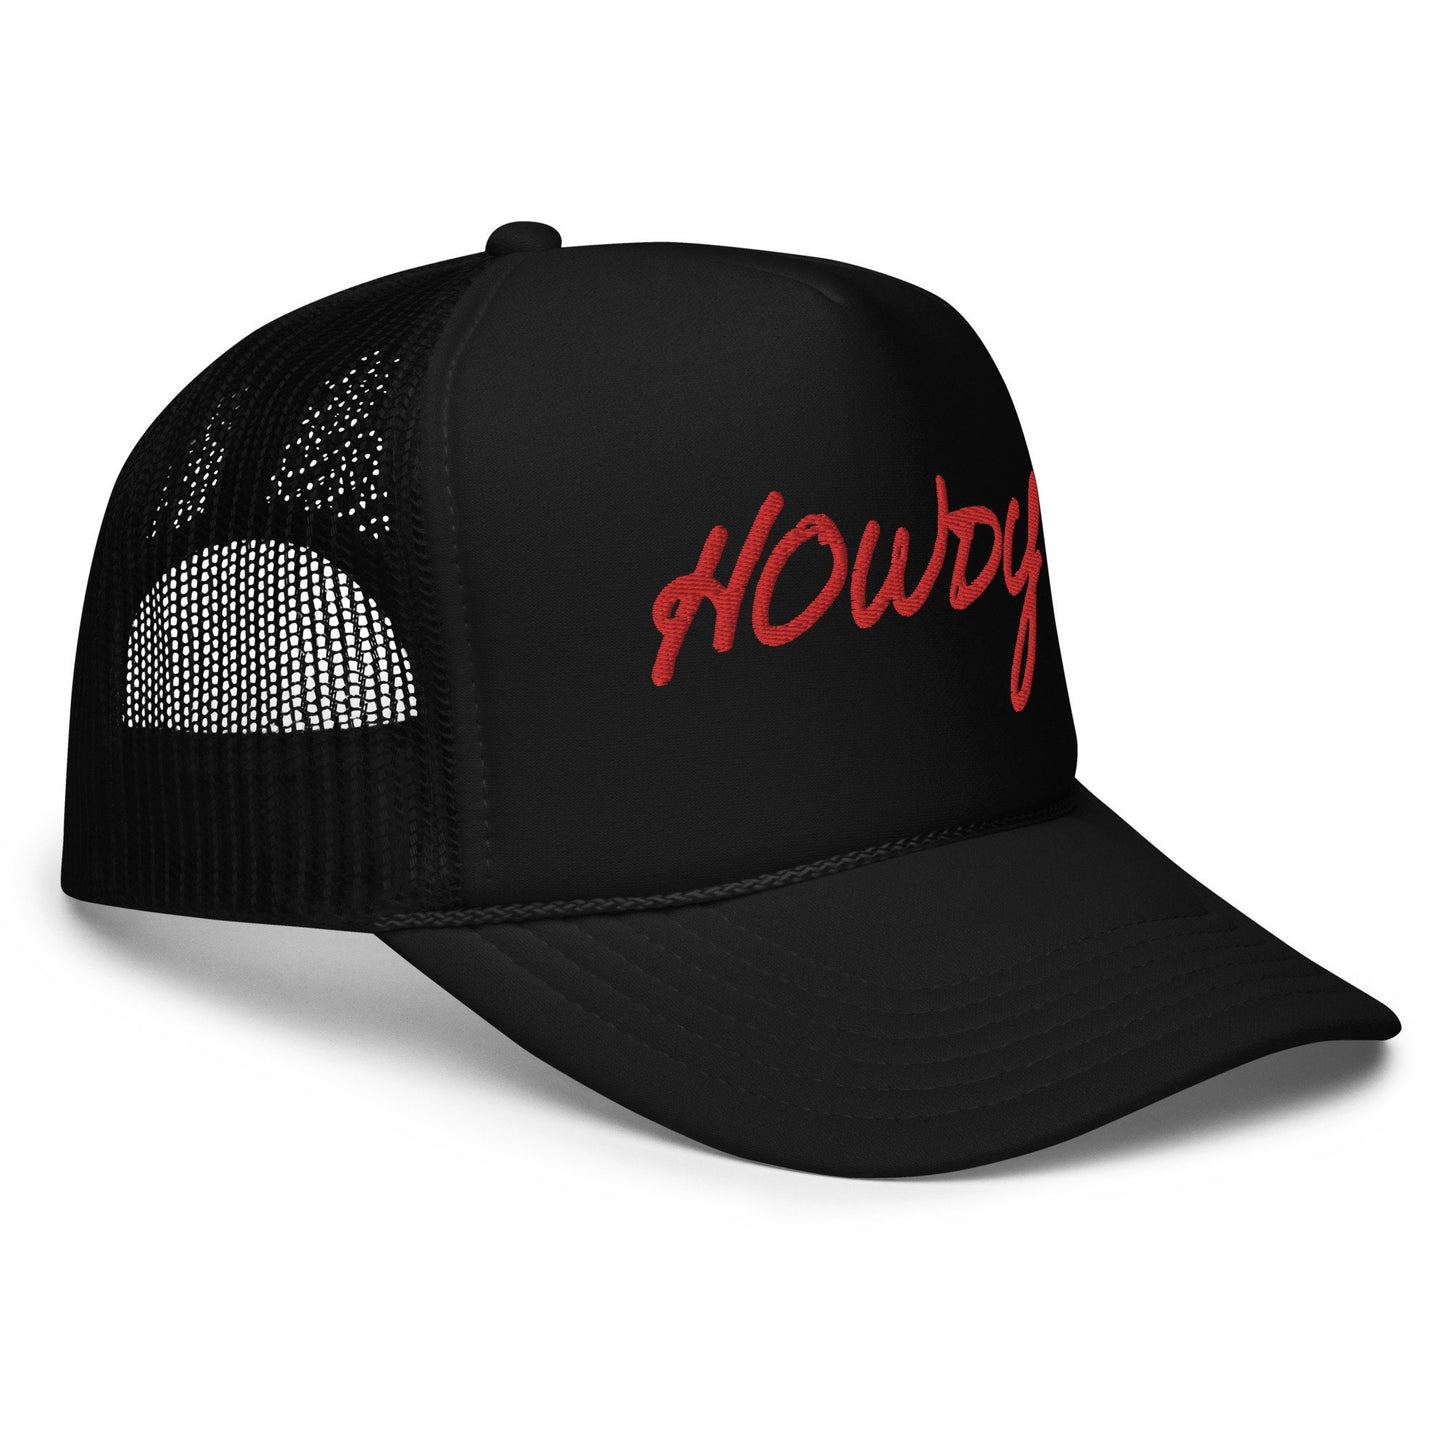 Howdy - Classic Red Stitching Trucker Hat